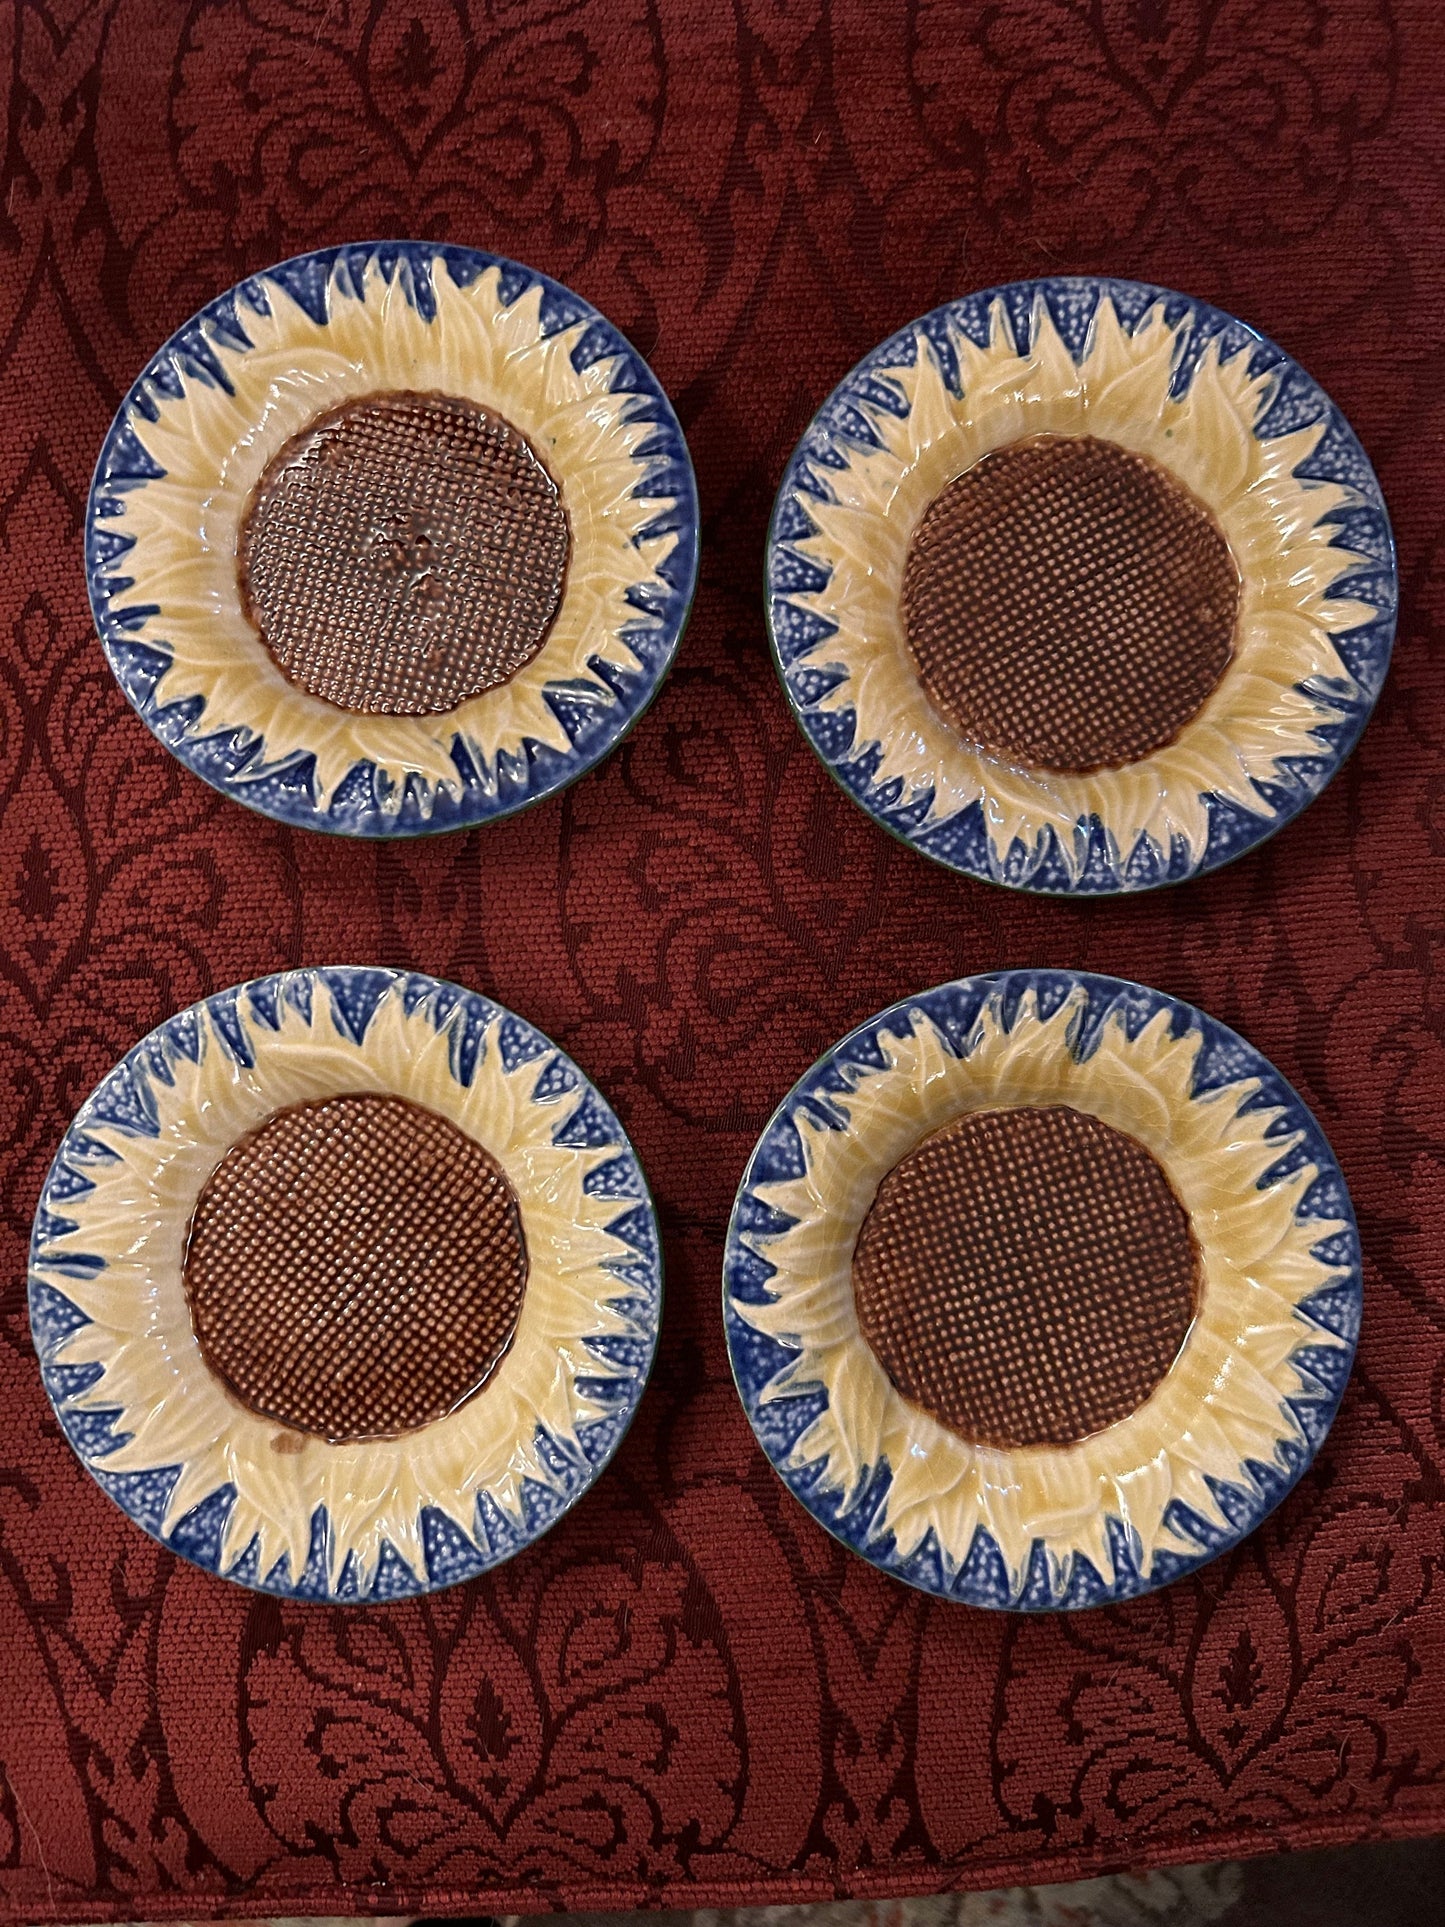 Metropolitan Museum Reproduction of Etruscan Sunflower Dishes 5” 60/2